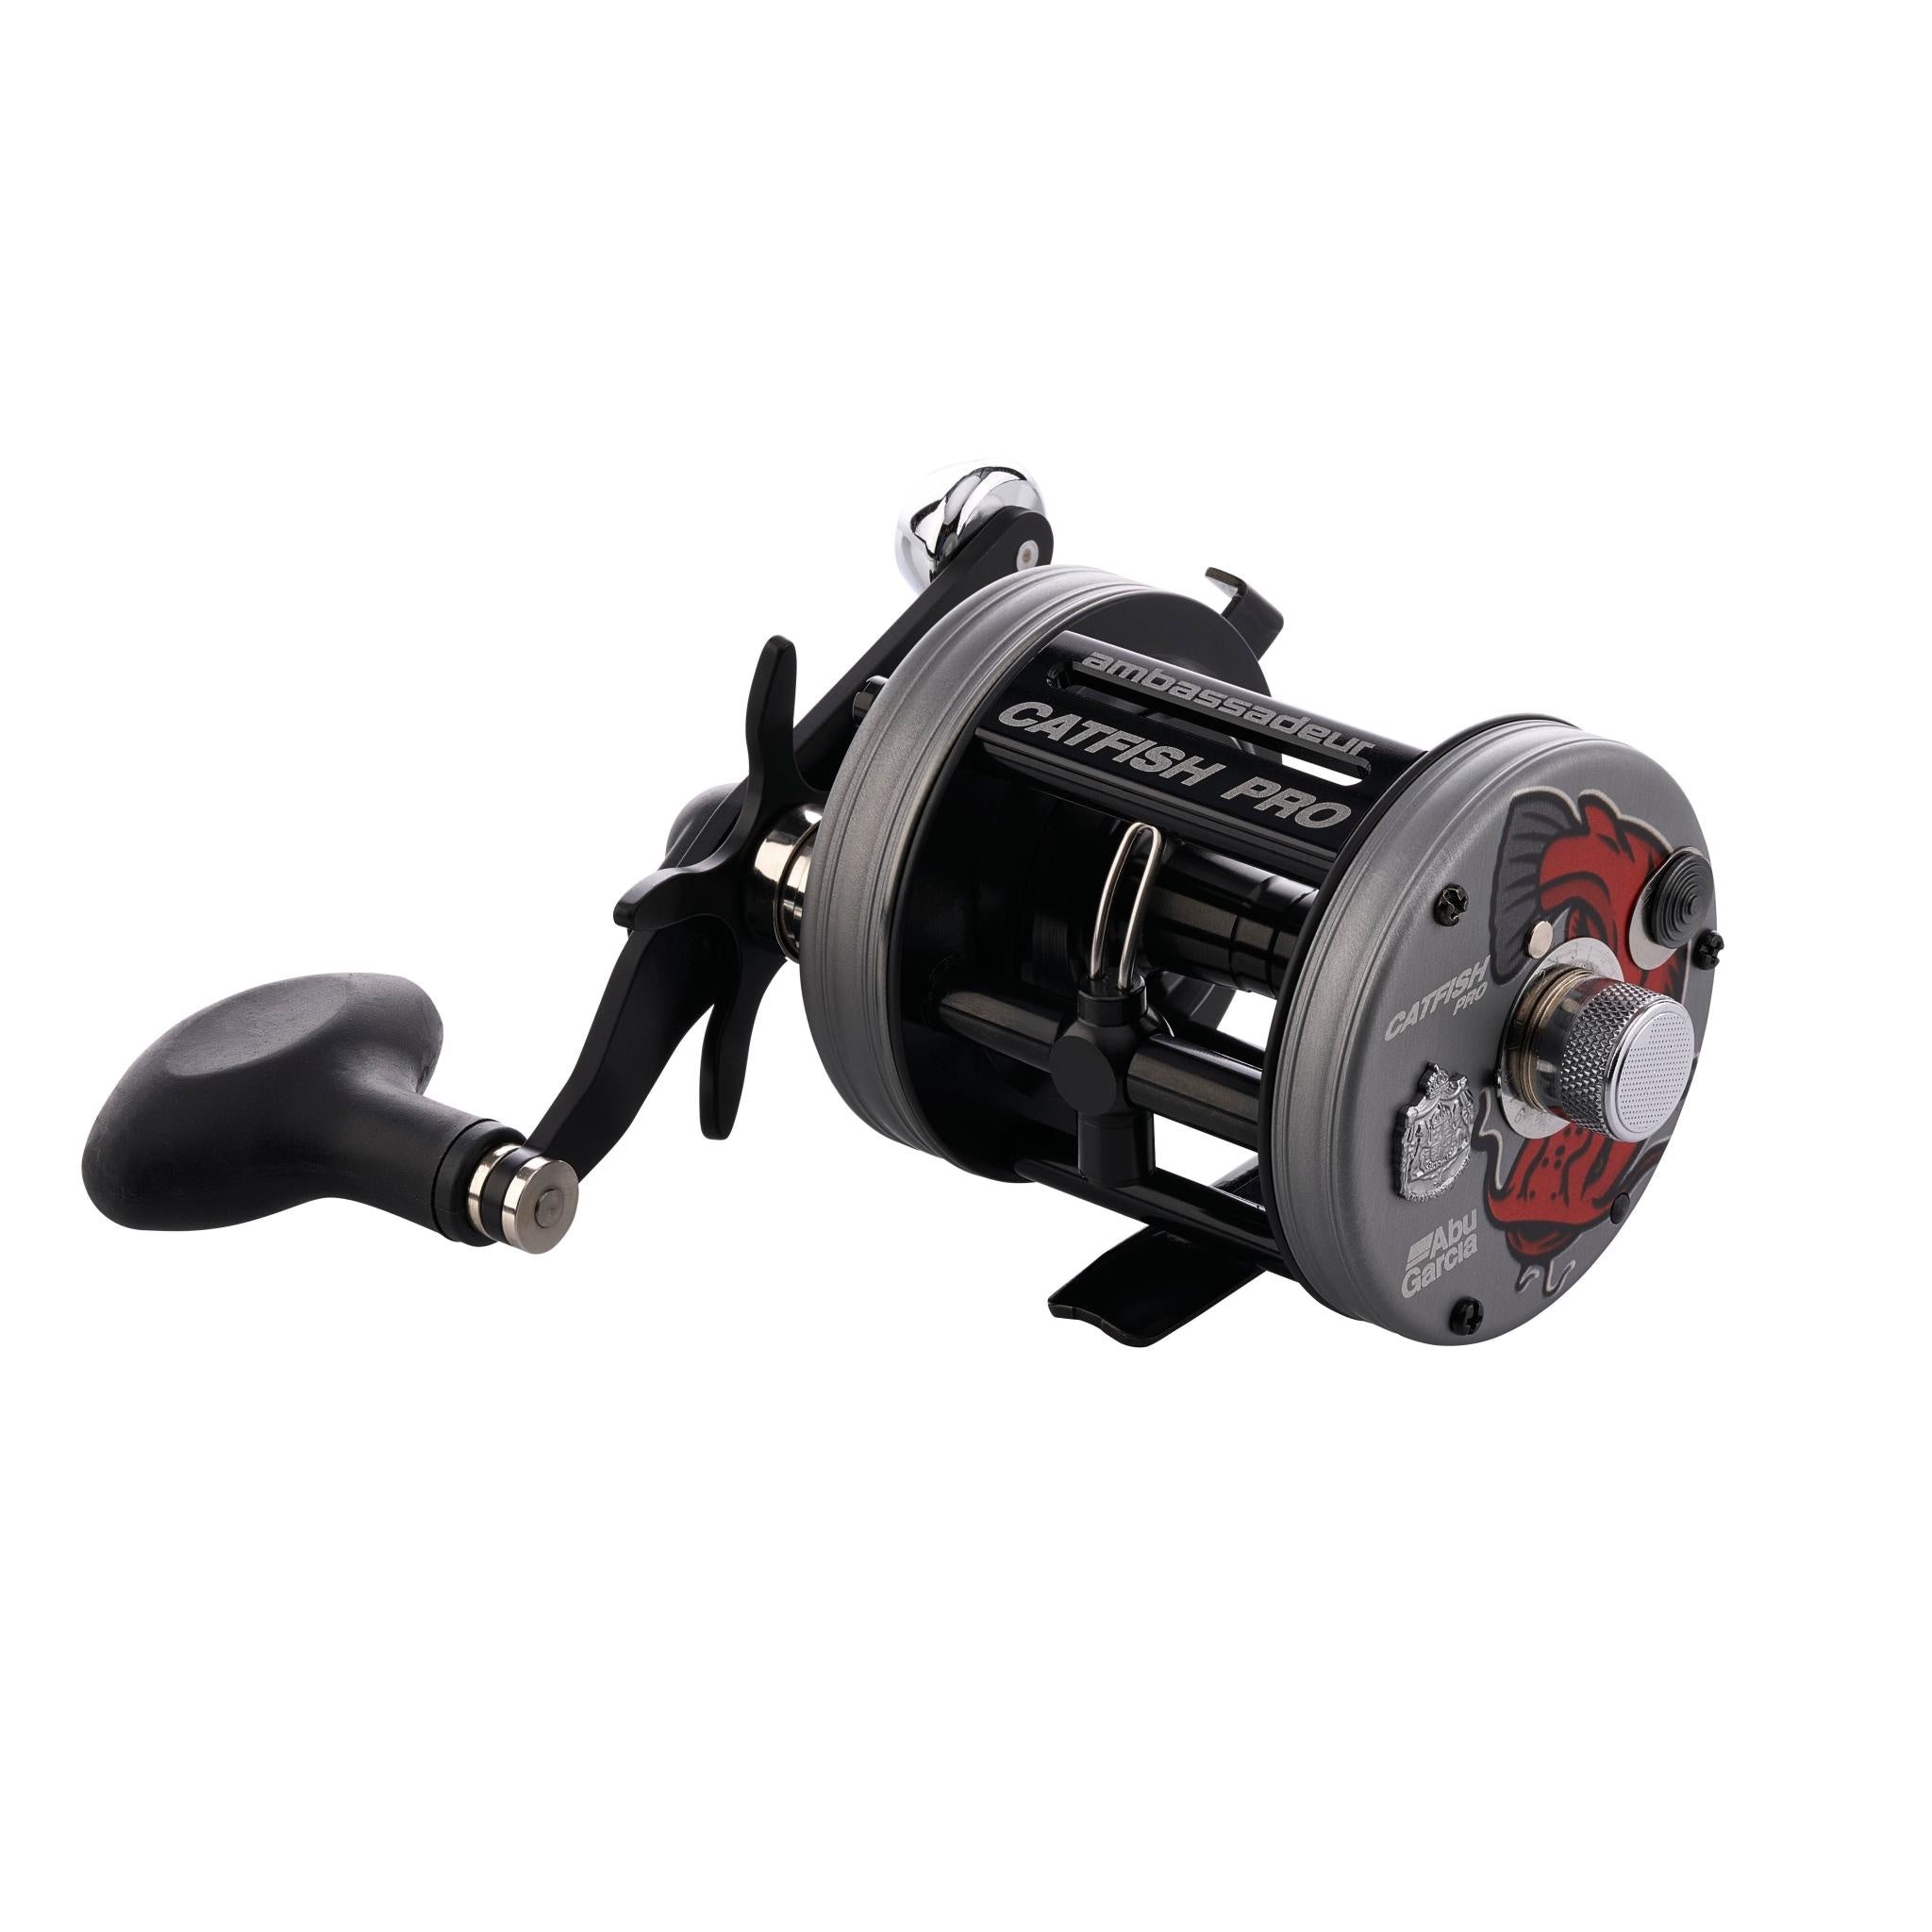 Abu Garcia Vintage Ambassadeur 6500C Bait Casting Fishing Reel Made in  Sweden - Contact Us - The Woodlands Tx Classifieds Sports & Exercise  Equipment, For Sale - Fishing & Hunting Equipment on Woodlands Online